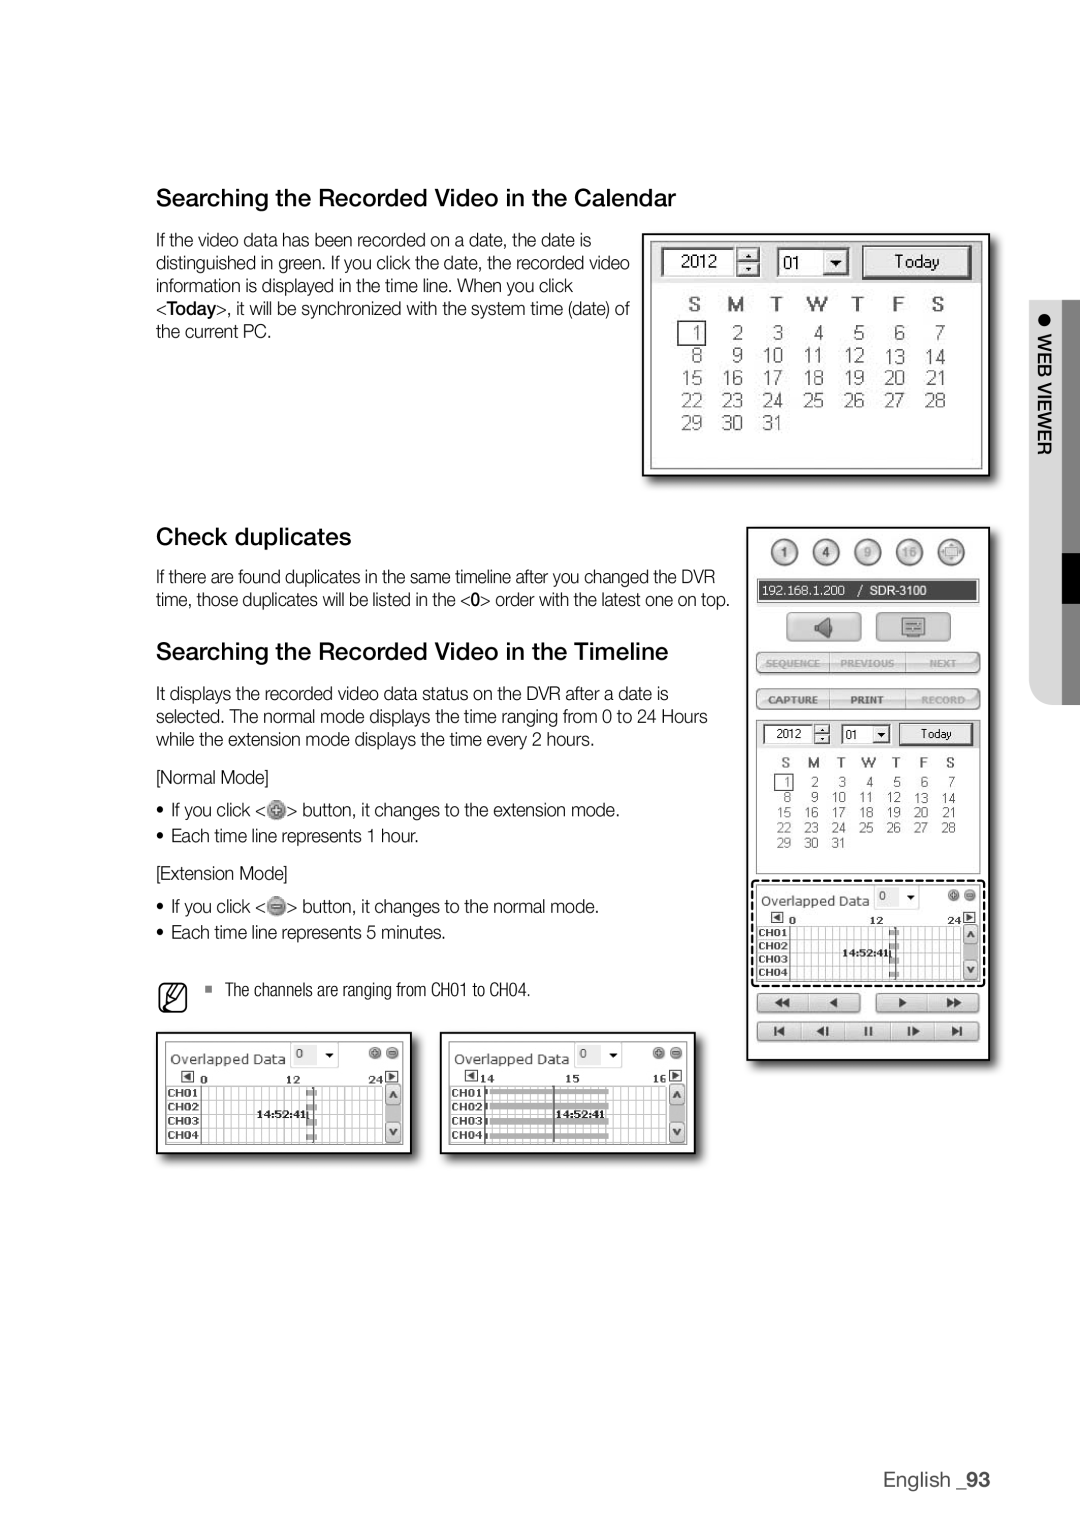 Samsung SDR3100 user manual Searching the recorded Video in the calendar, check duplicates, English _93 